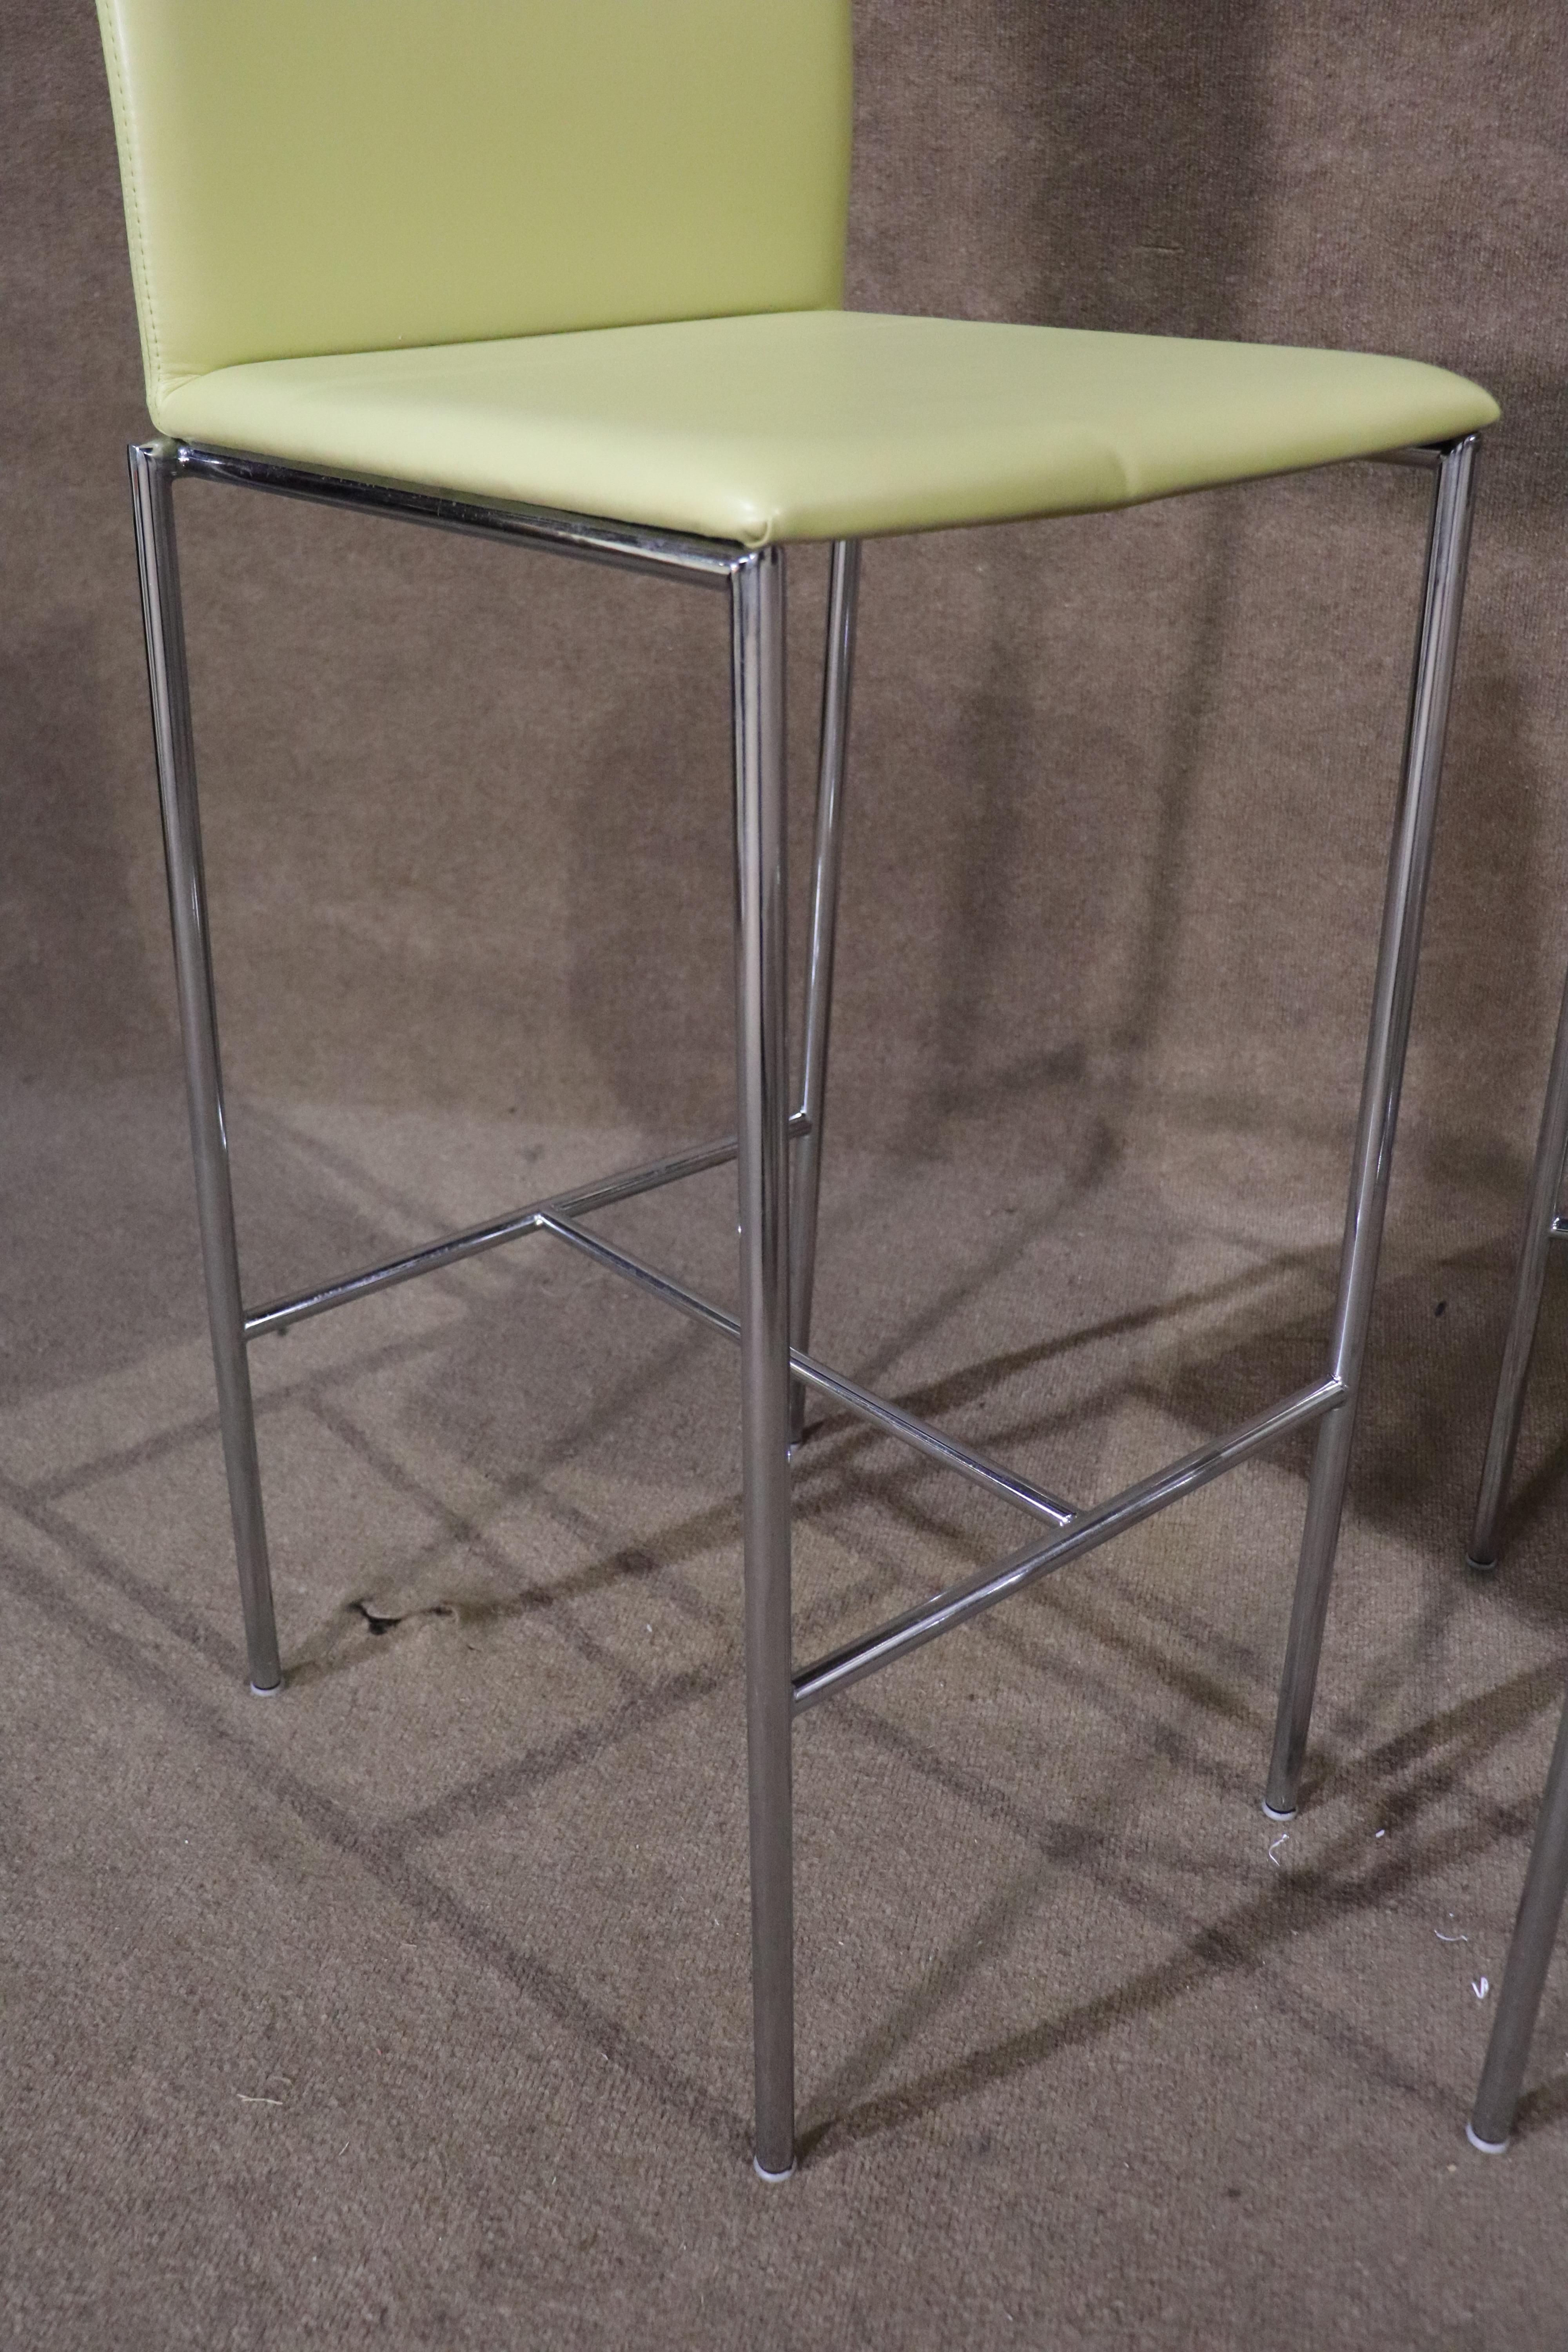 Polished Chrome Bar Stools In Good Condition For Sale In Brooklyn, NY